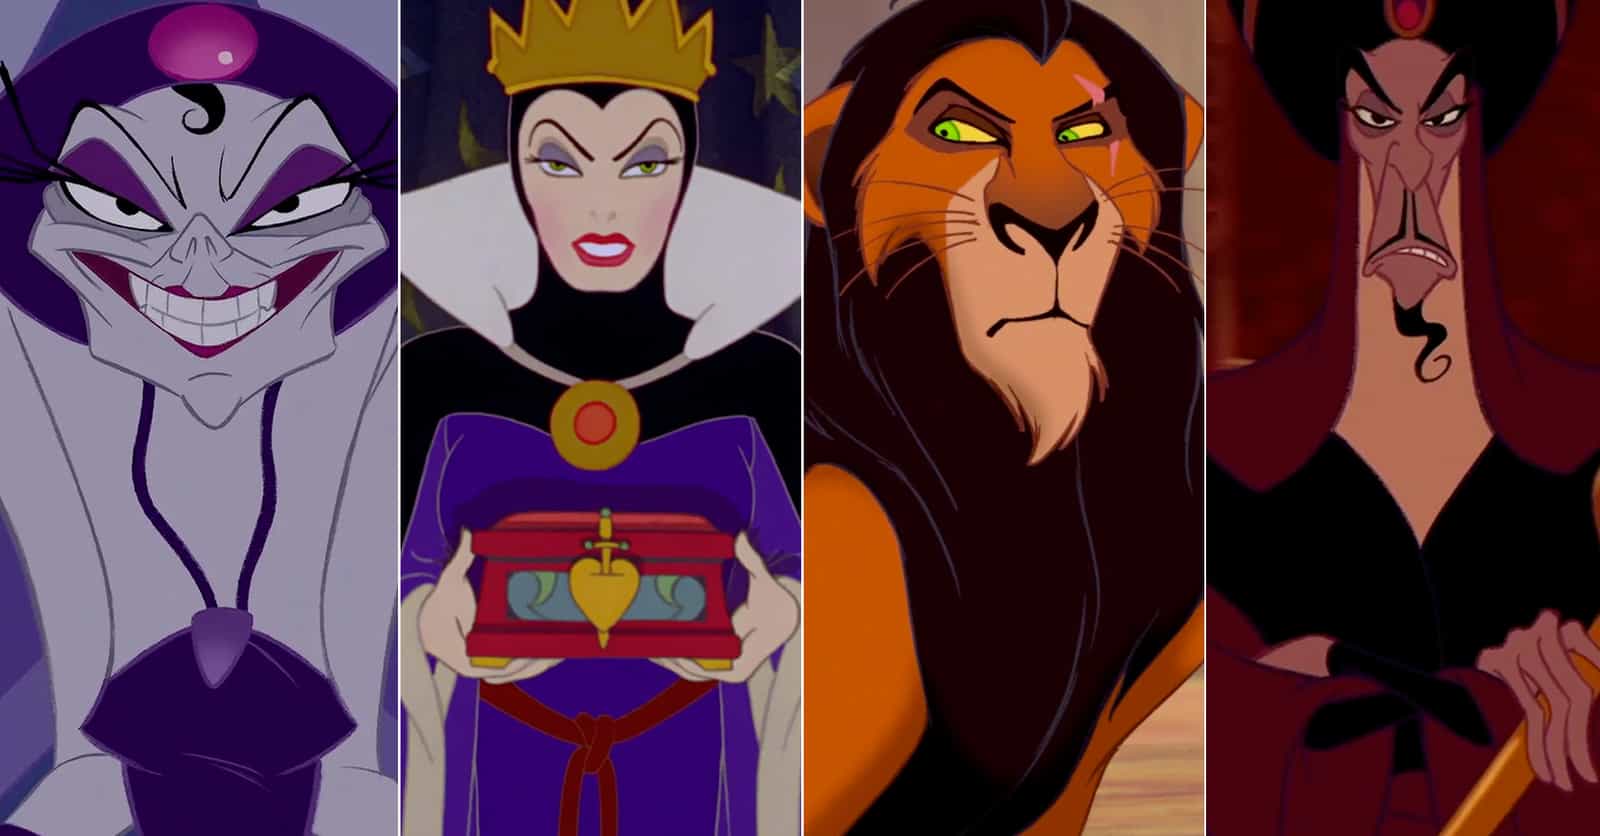 A Ranking of Disney Villains, Based on How Stupid Their Plans Are